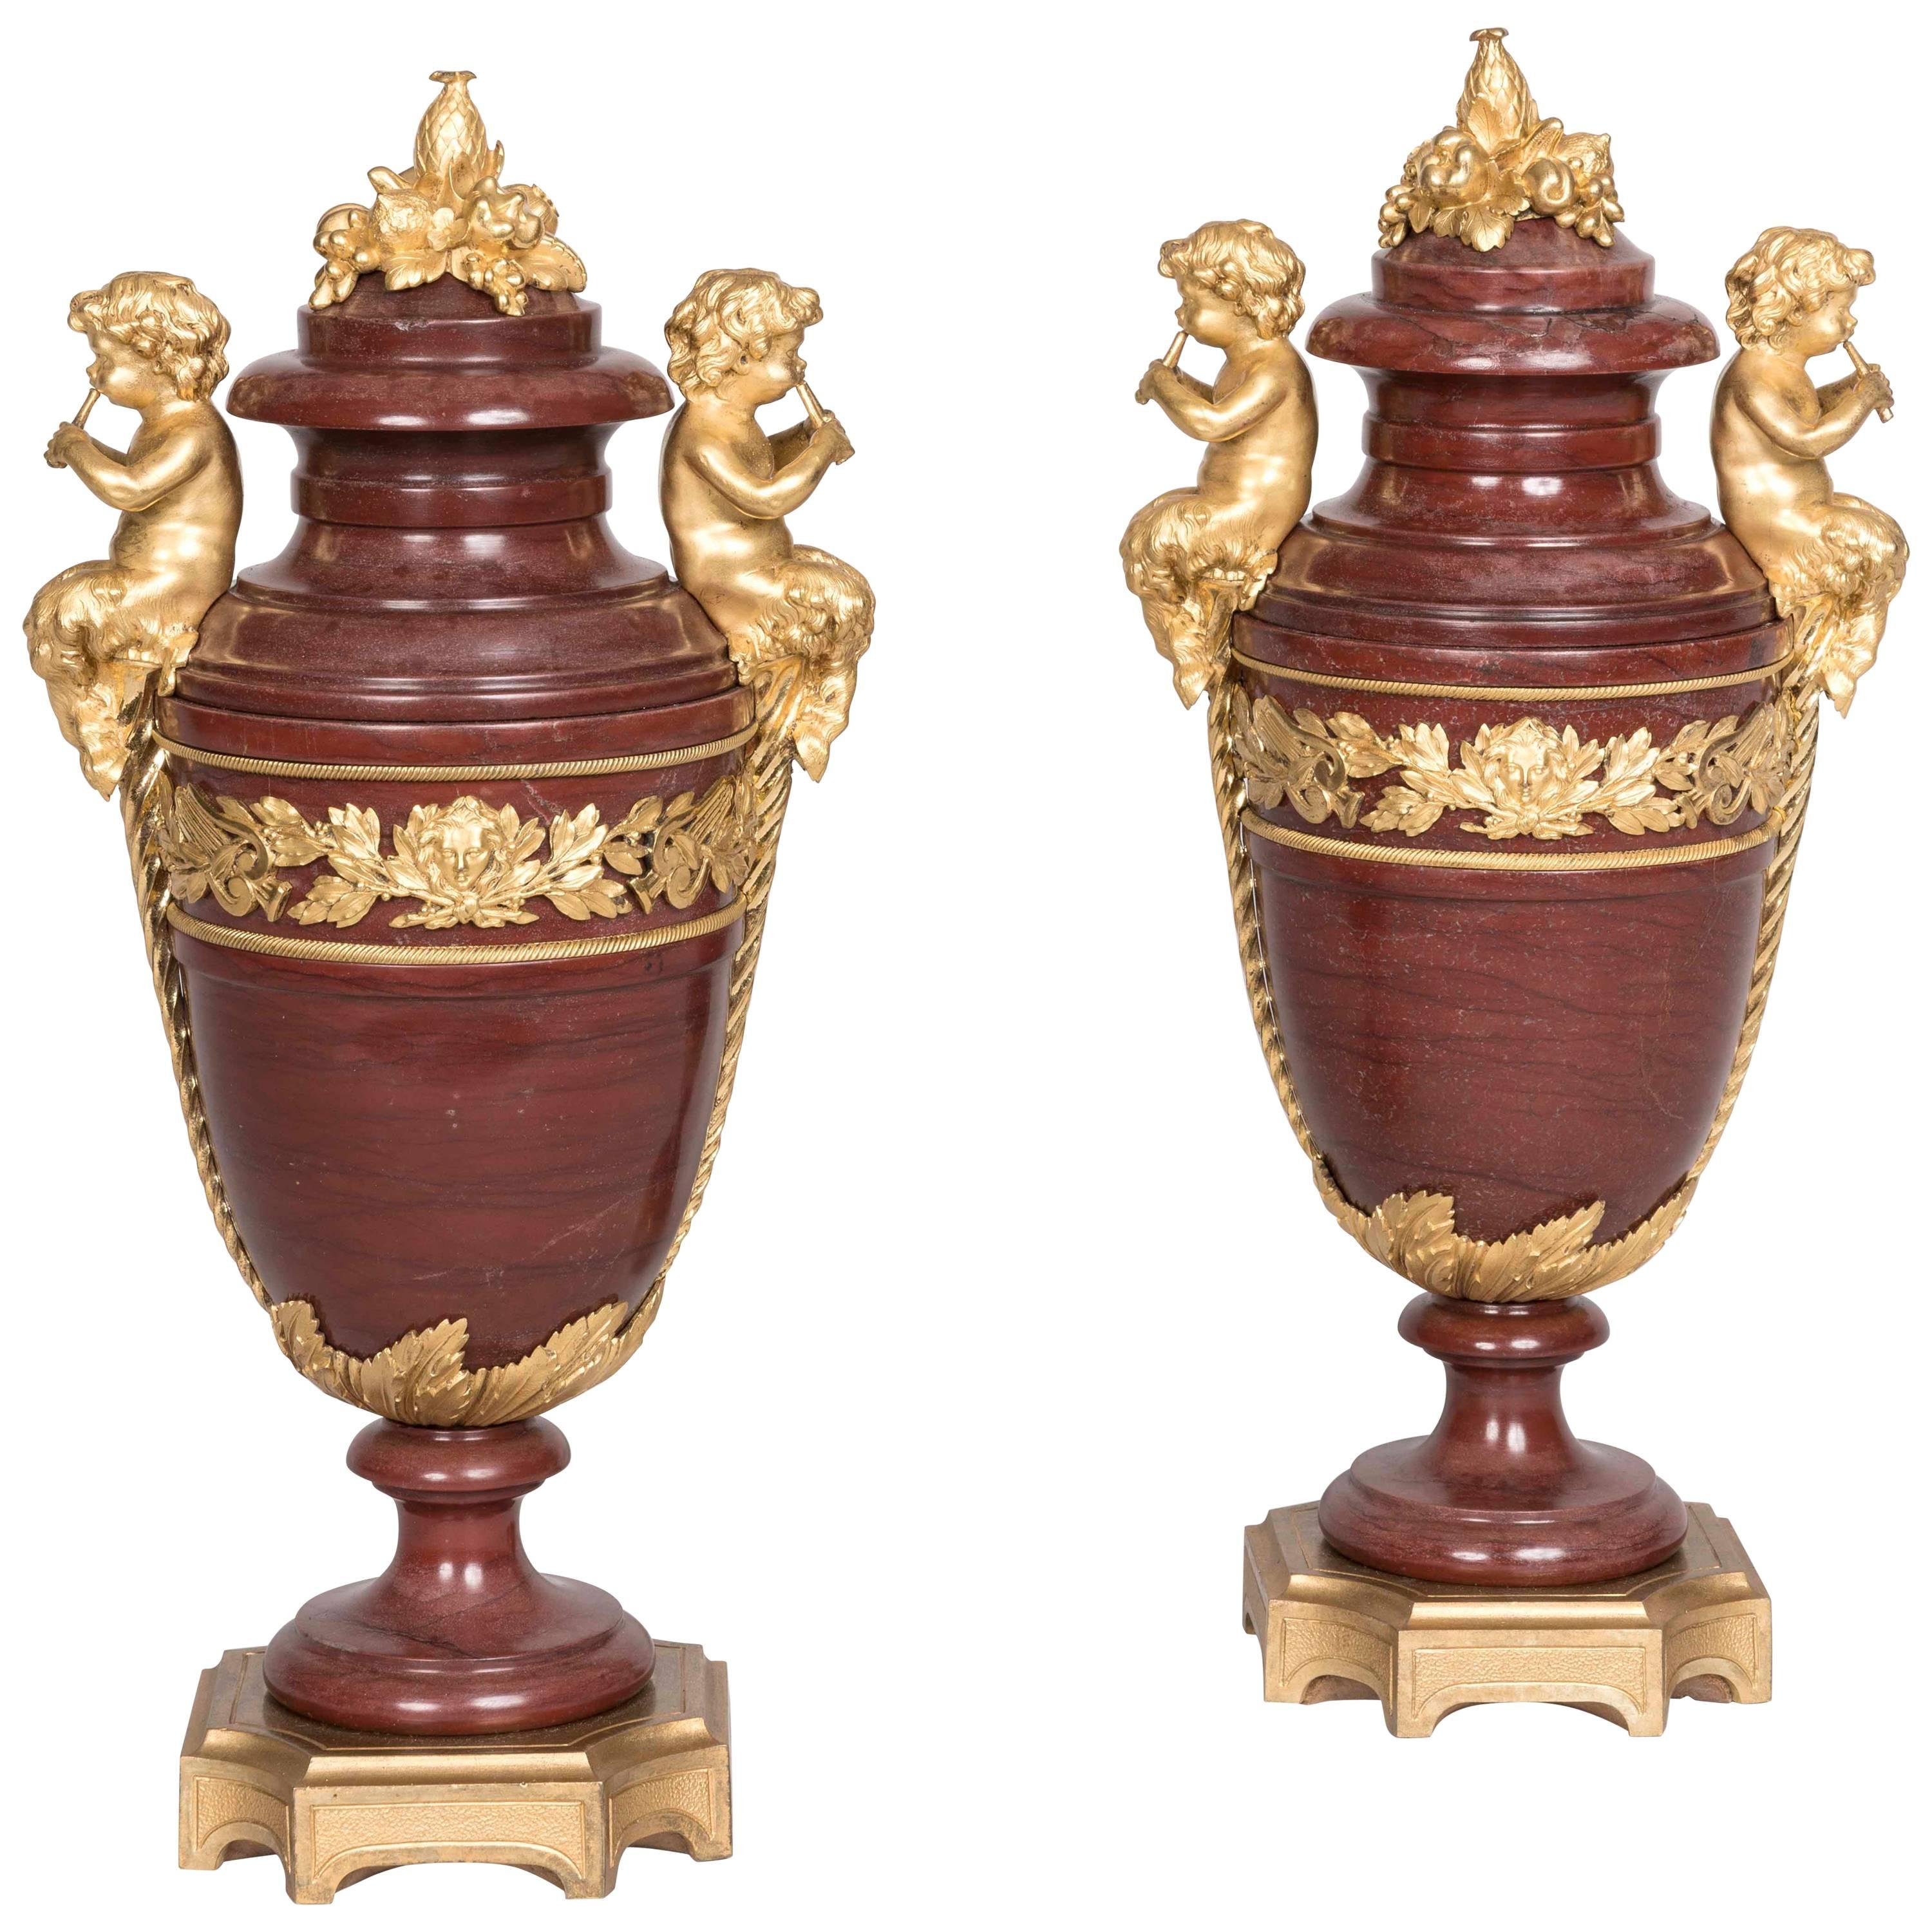 19th Century Pair of Louis XVI Marble and Ormolu Urns Attributed to Henry Dasson